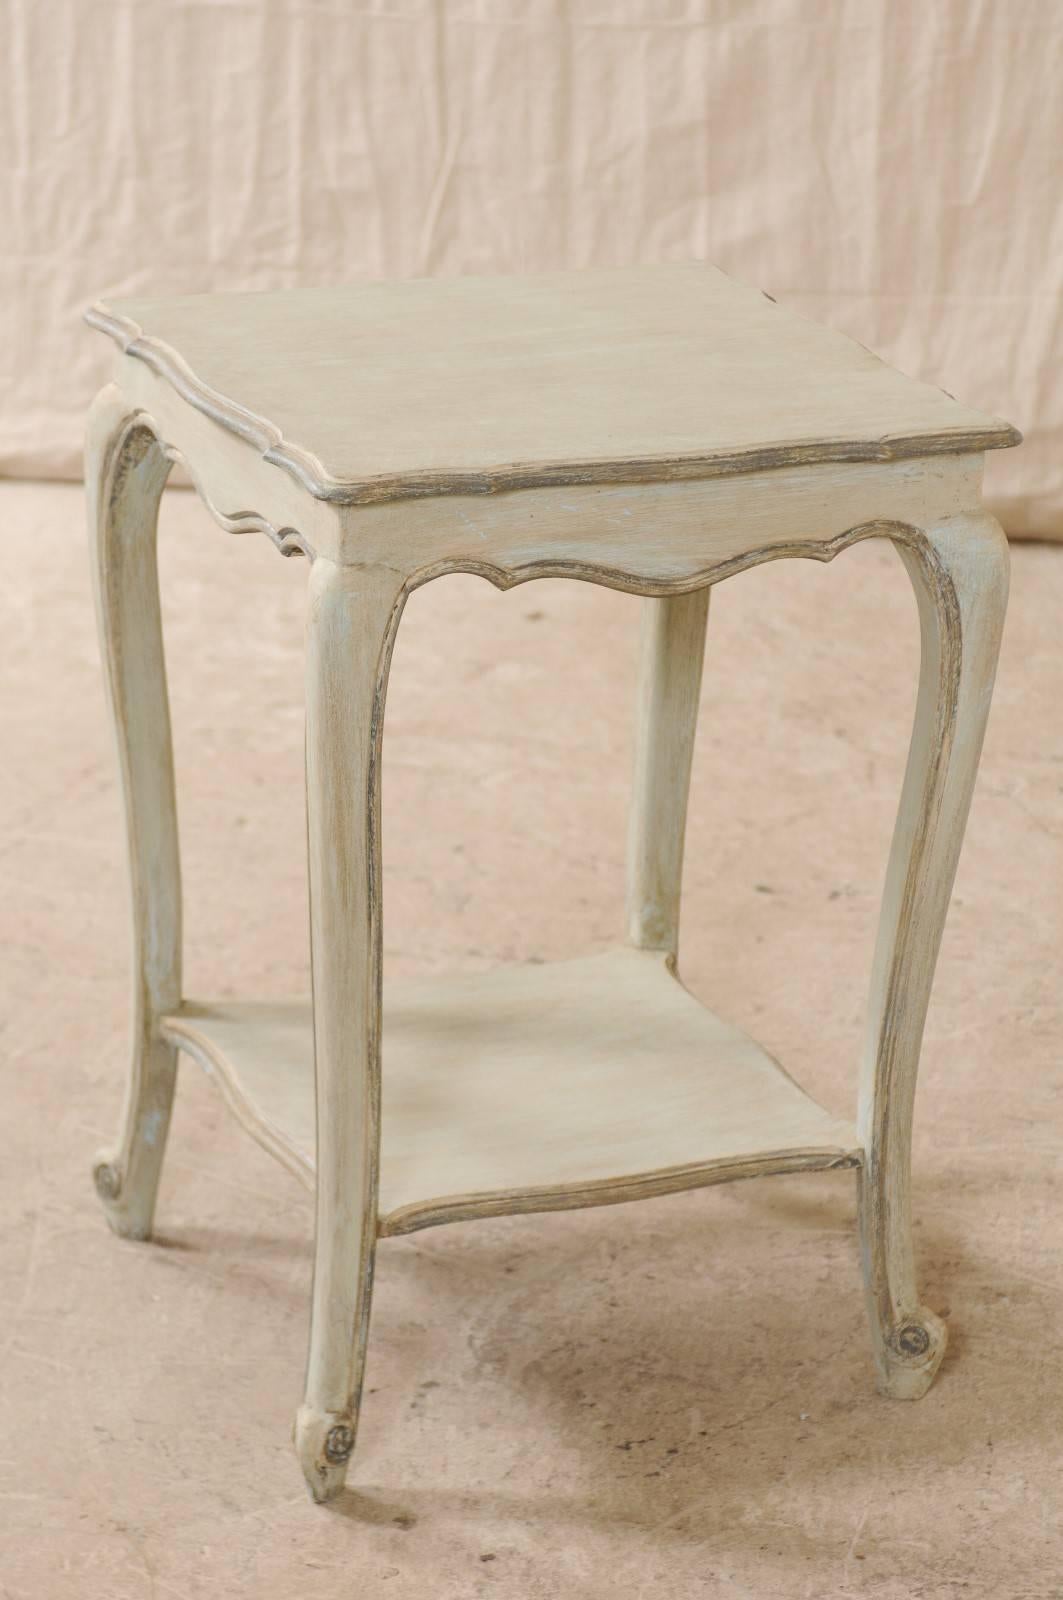 Vintage French Early 20th Century Painted Wood Side Table in Soft Pale Blue-Grey 2